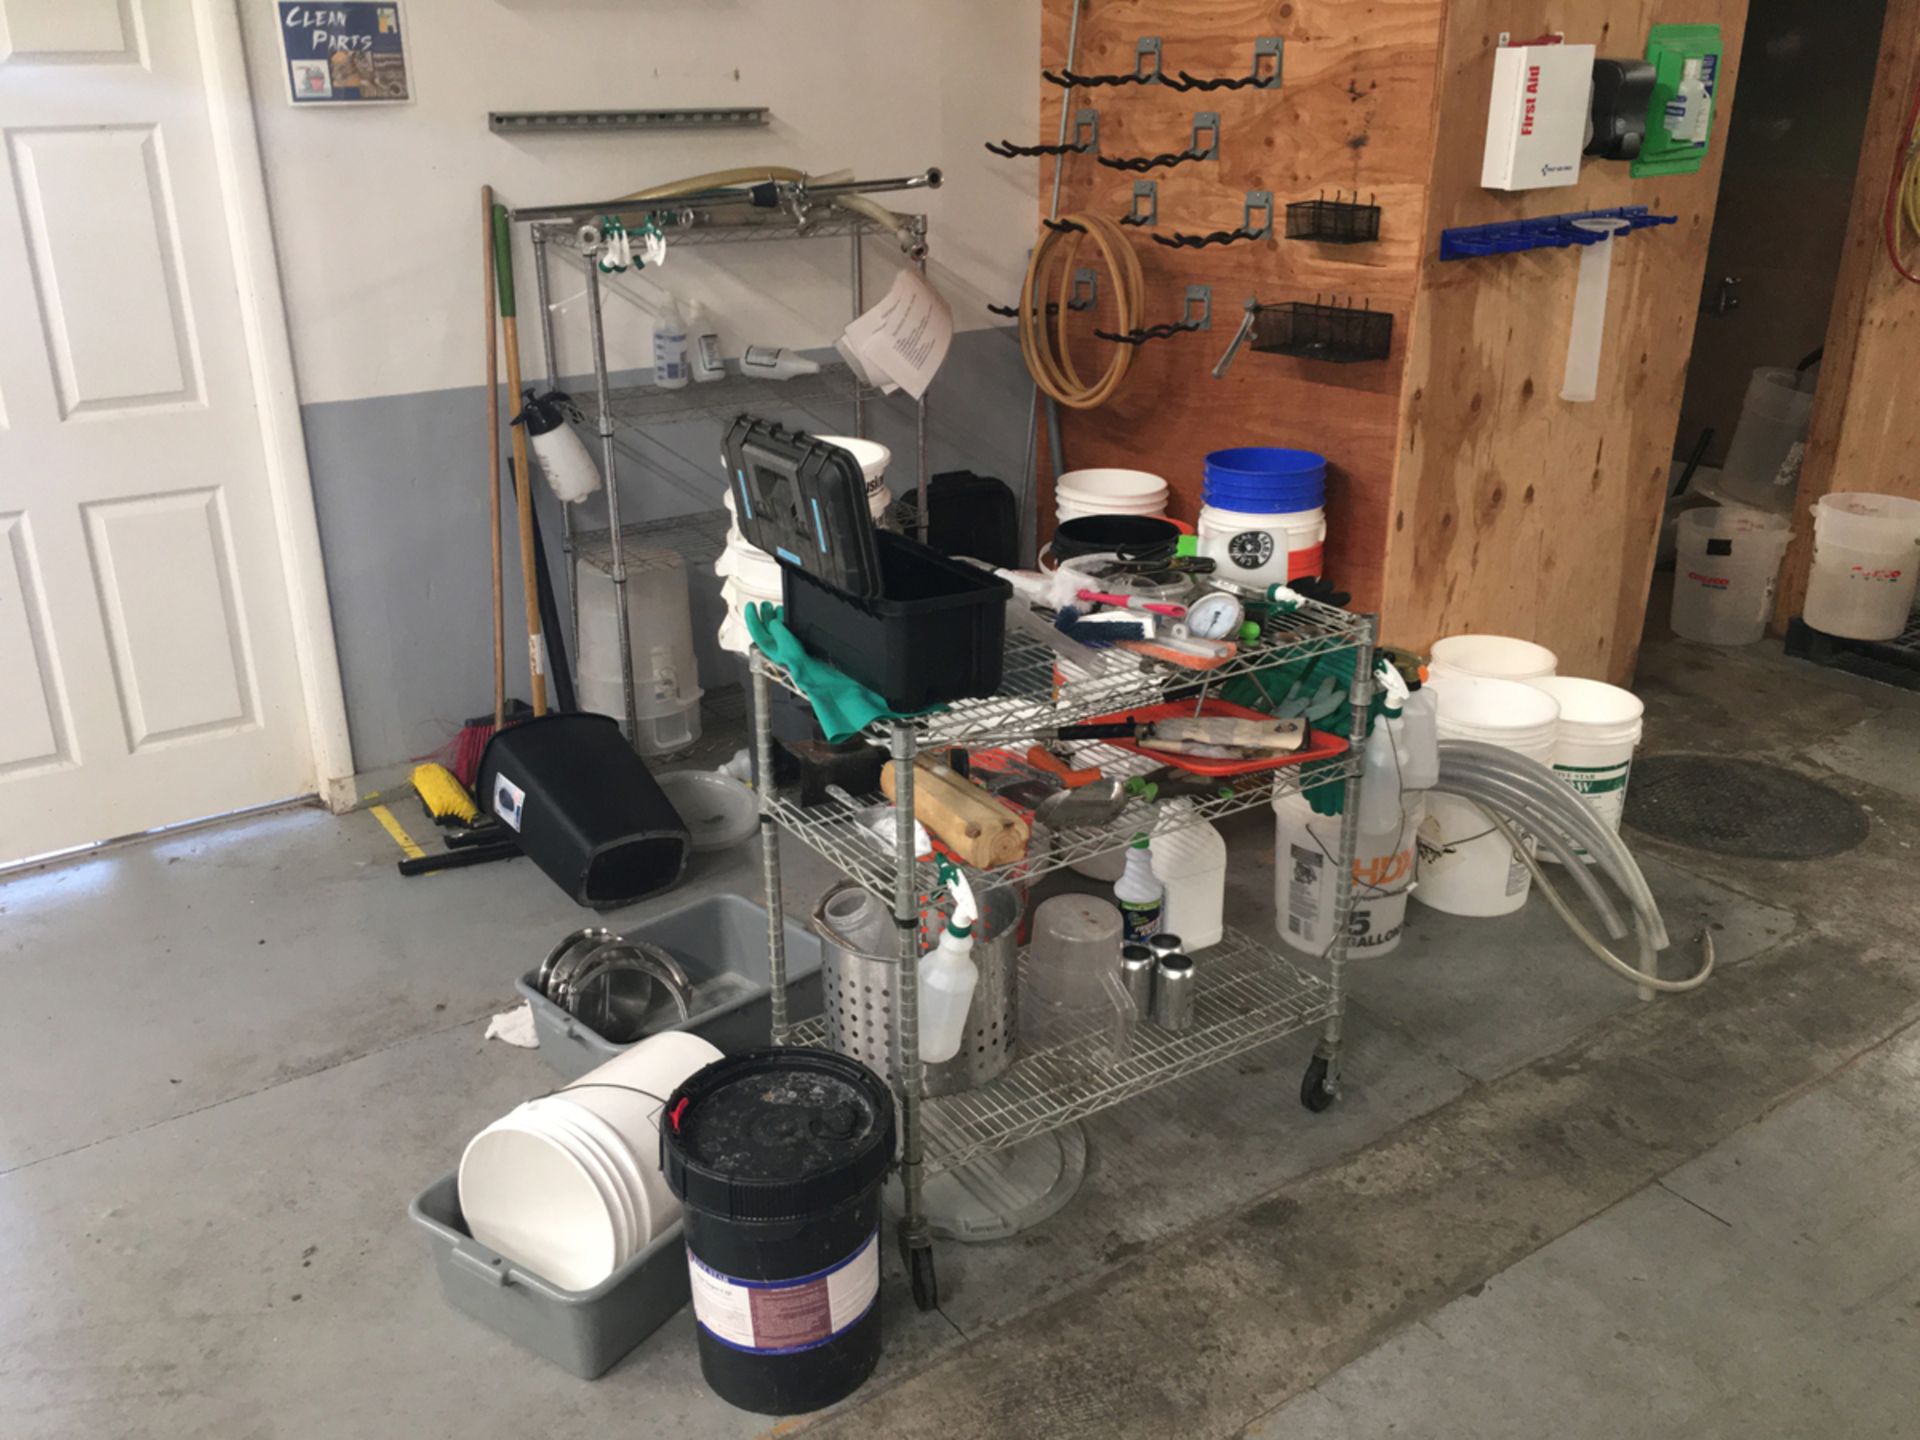 A Group of Tools, Buckets, And Storage